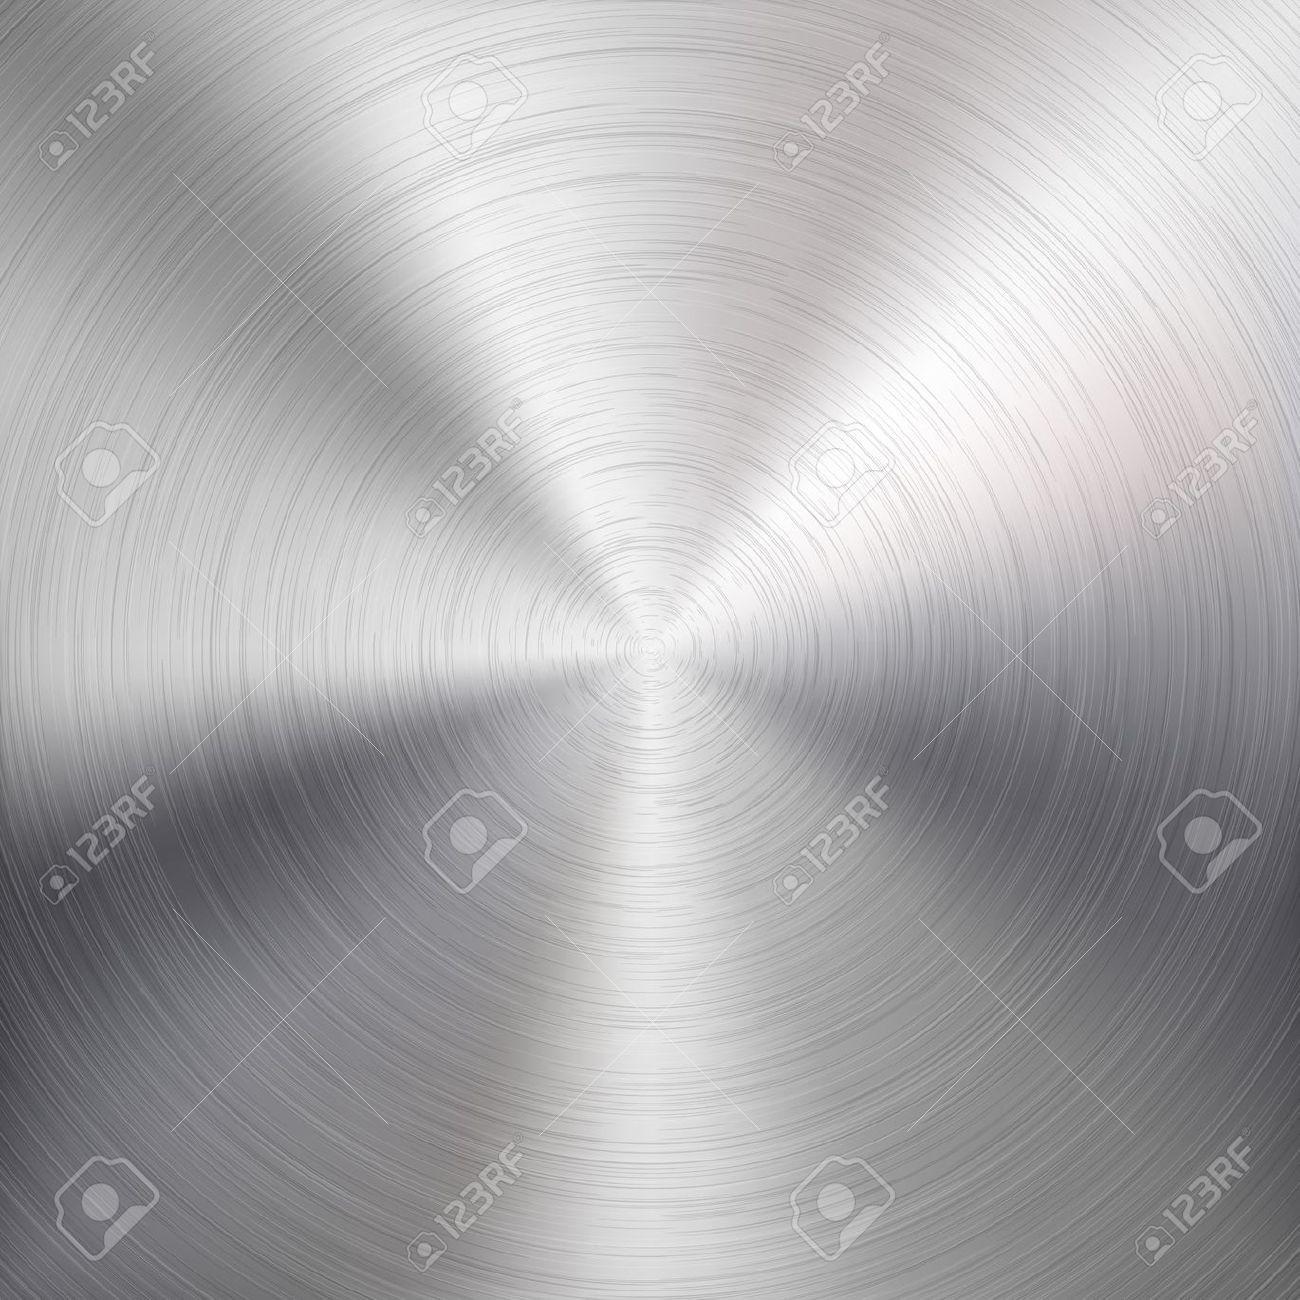 Background With Circular Metal Chrome, Iron, Stainless Steel